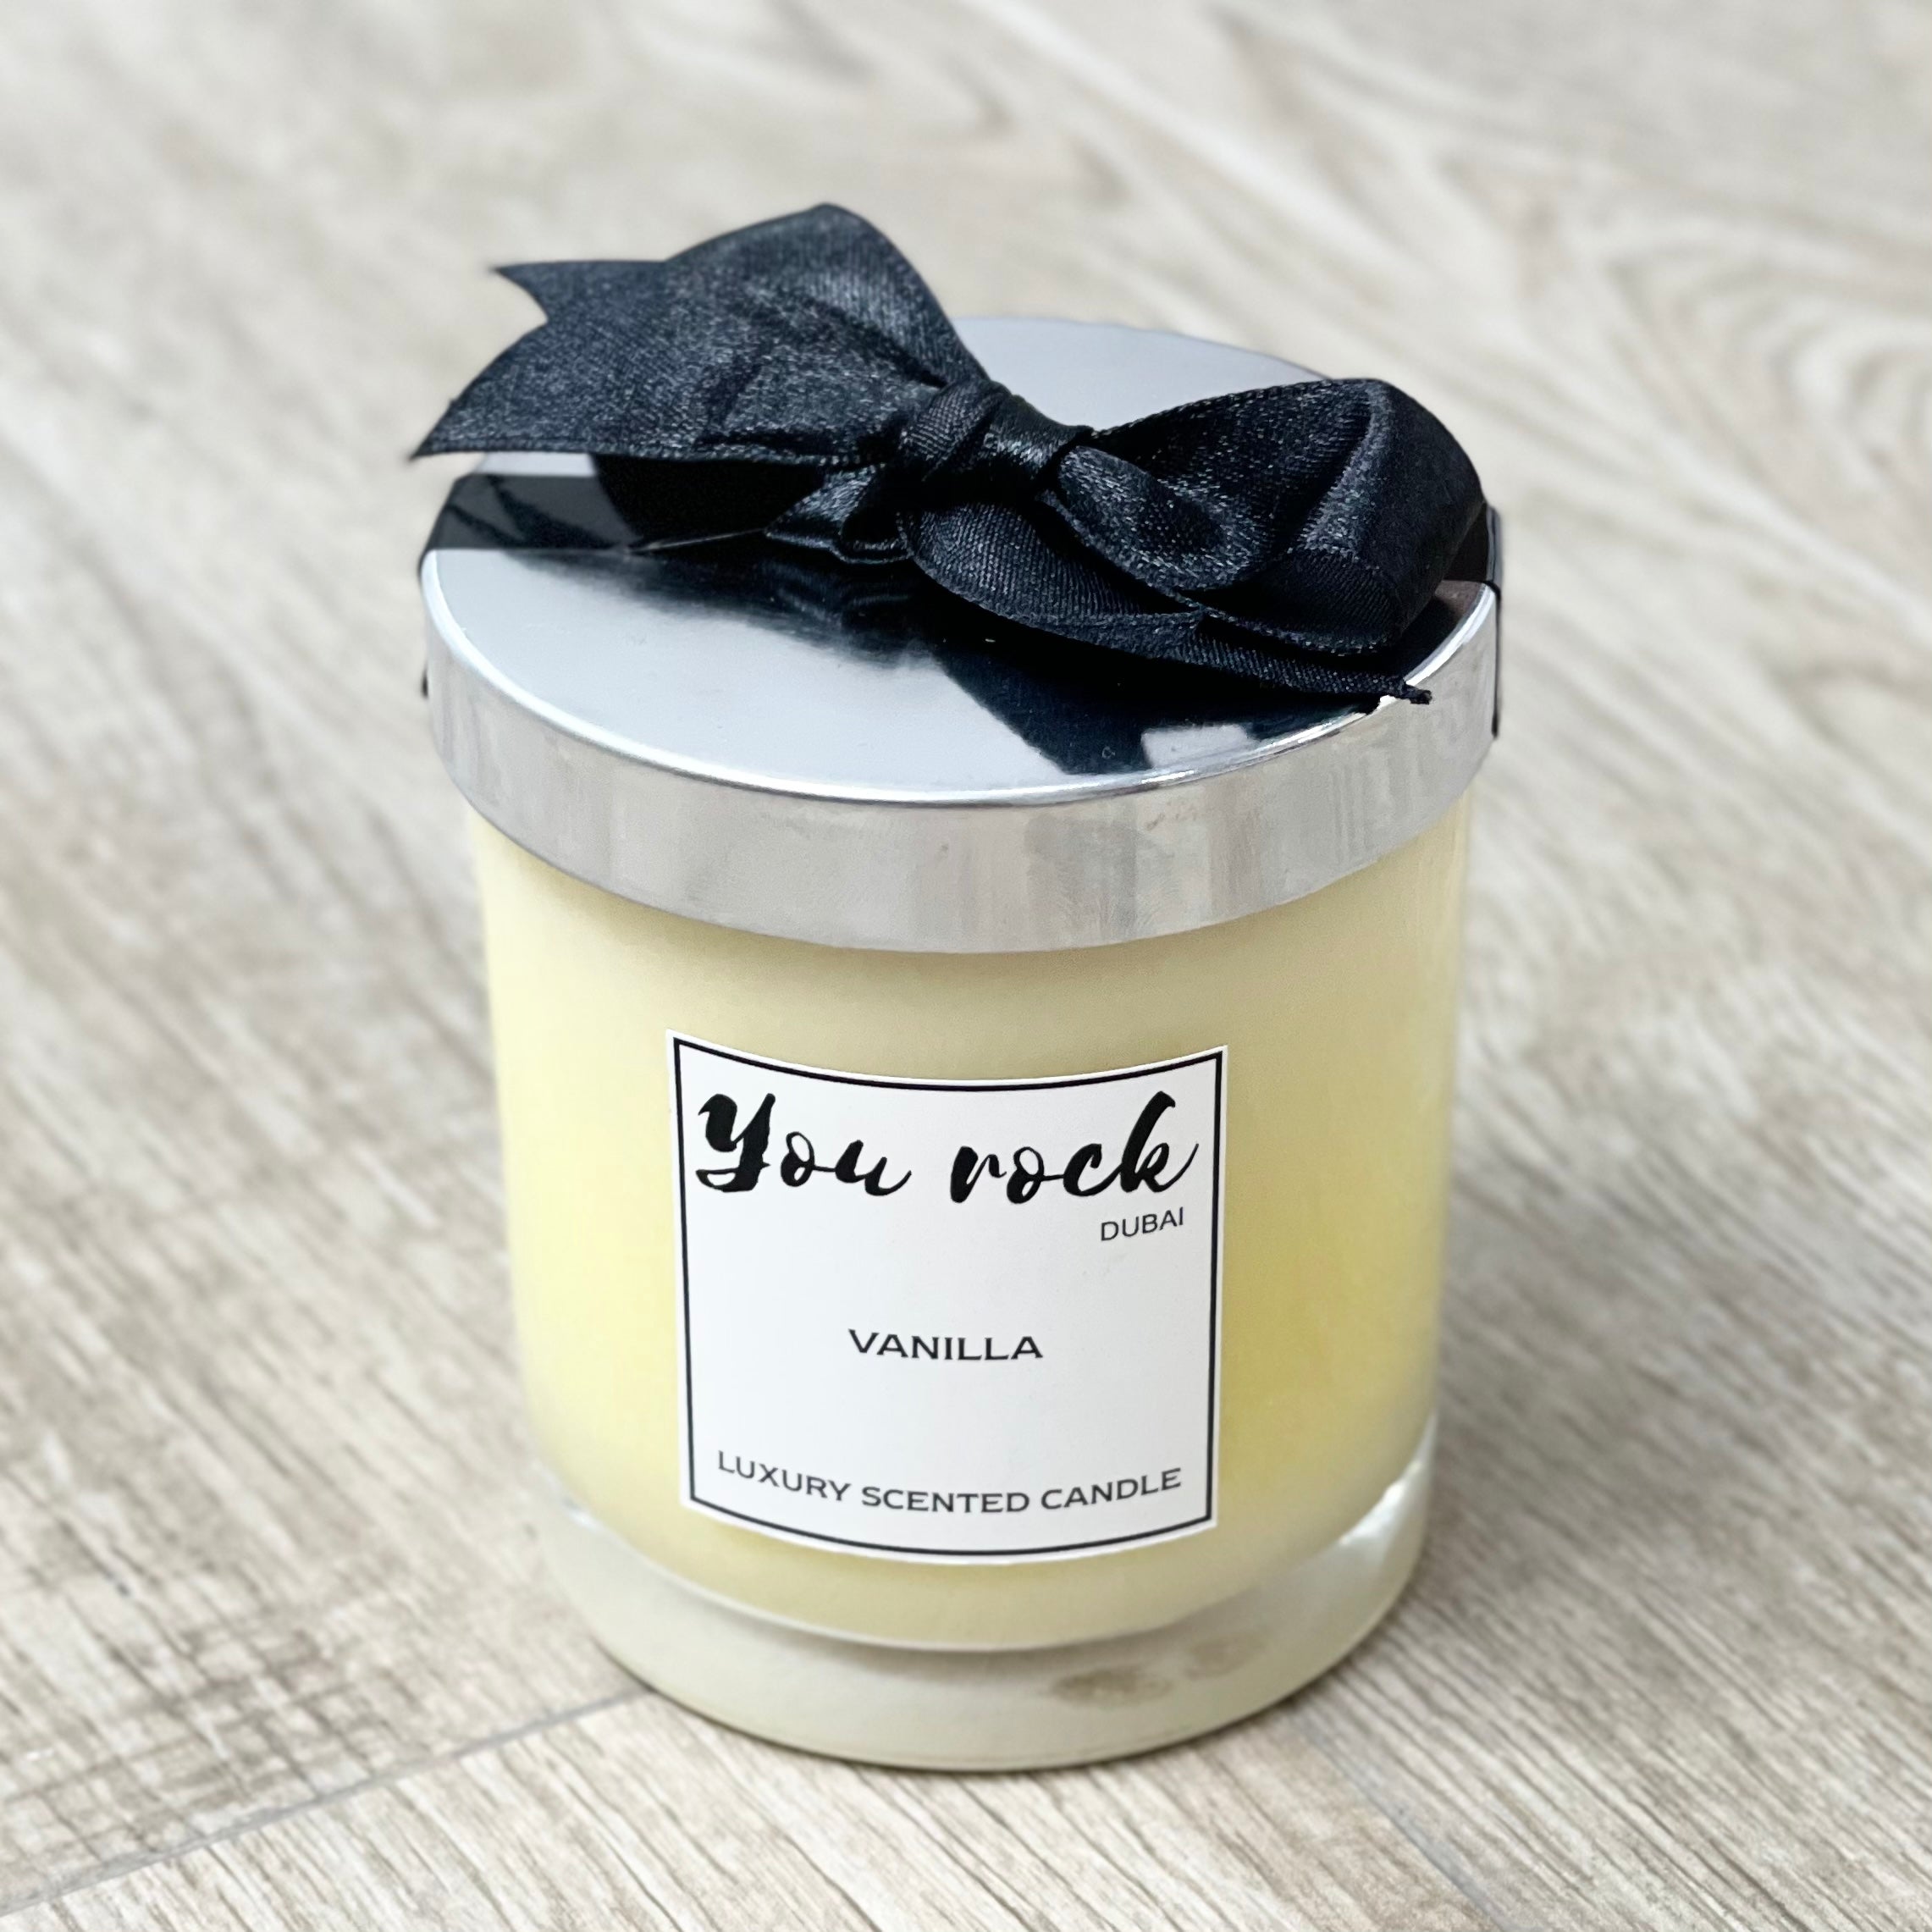 Natural Soy Wax Scented Candle - Vanilla Fragrance 